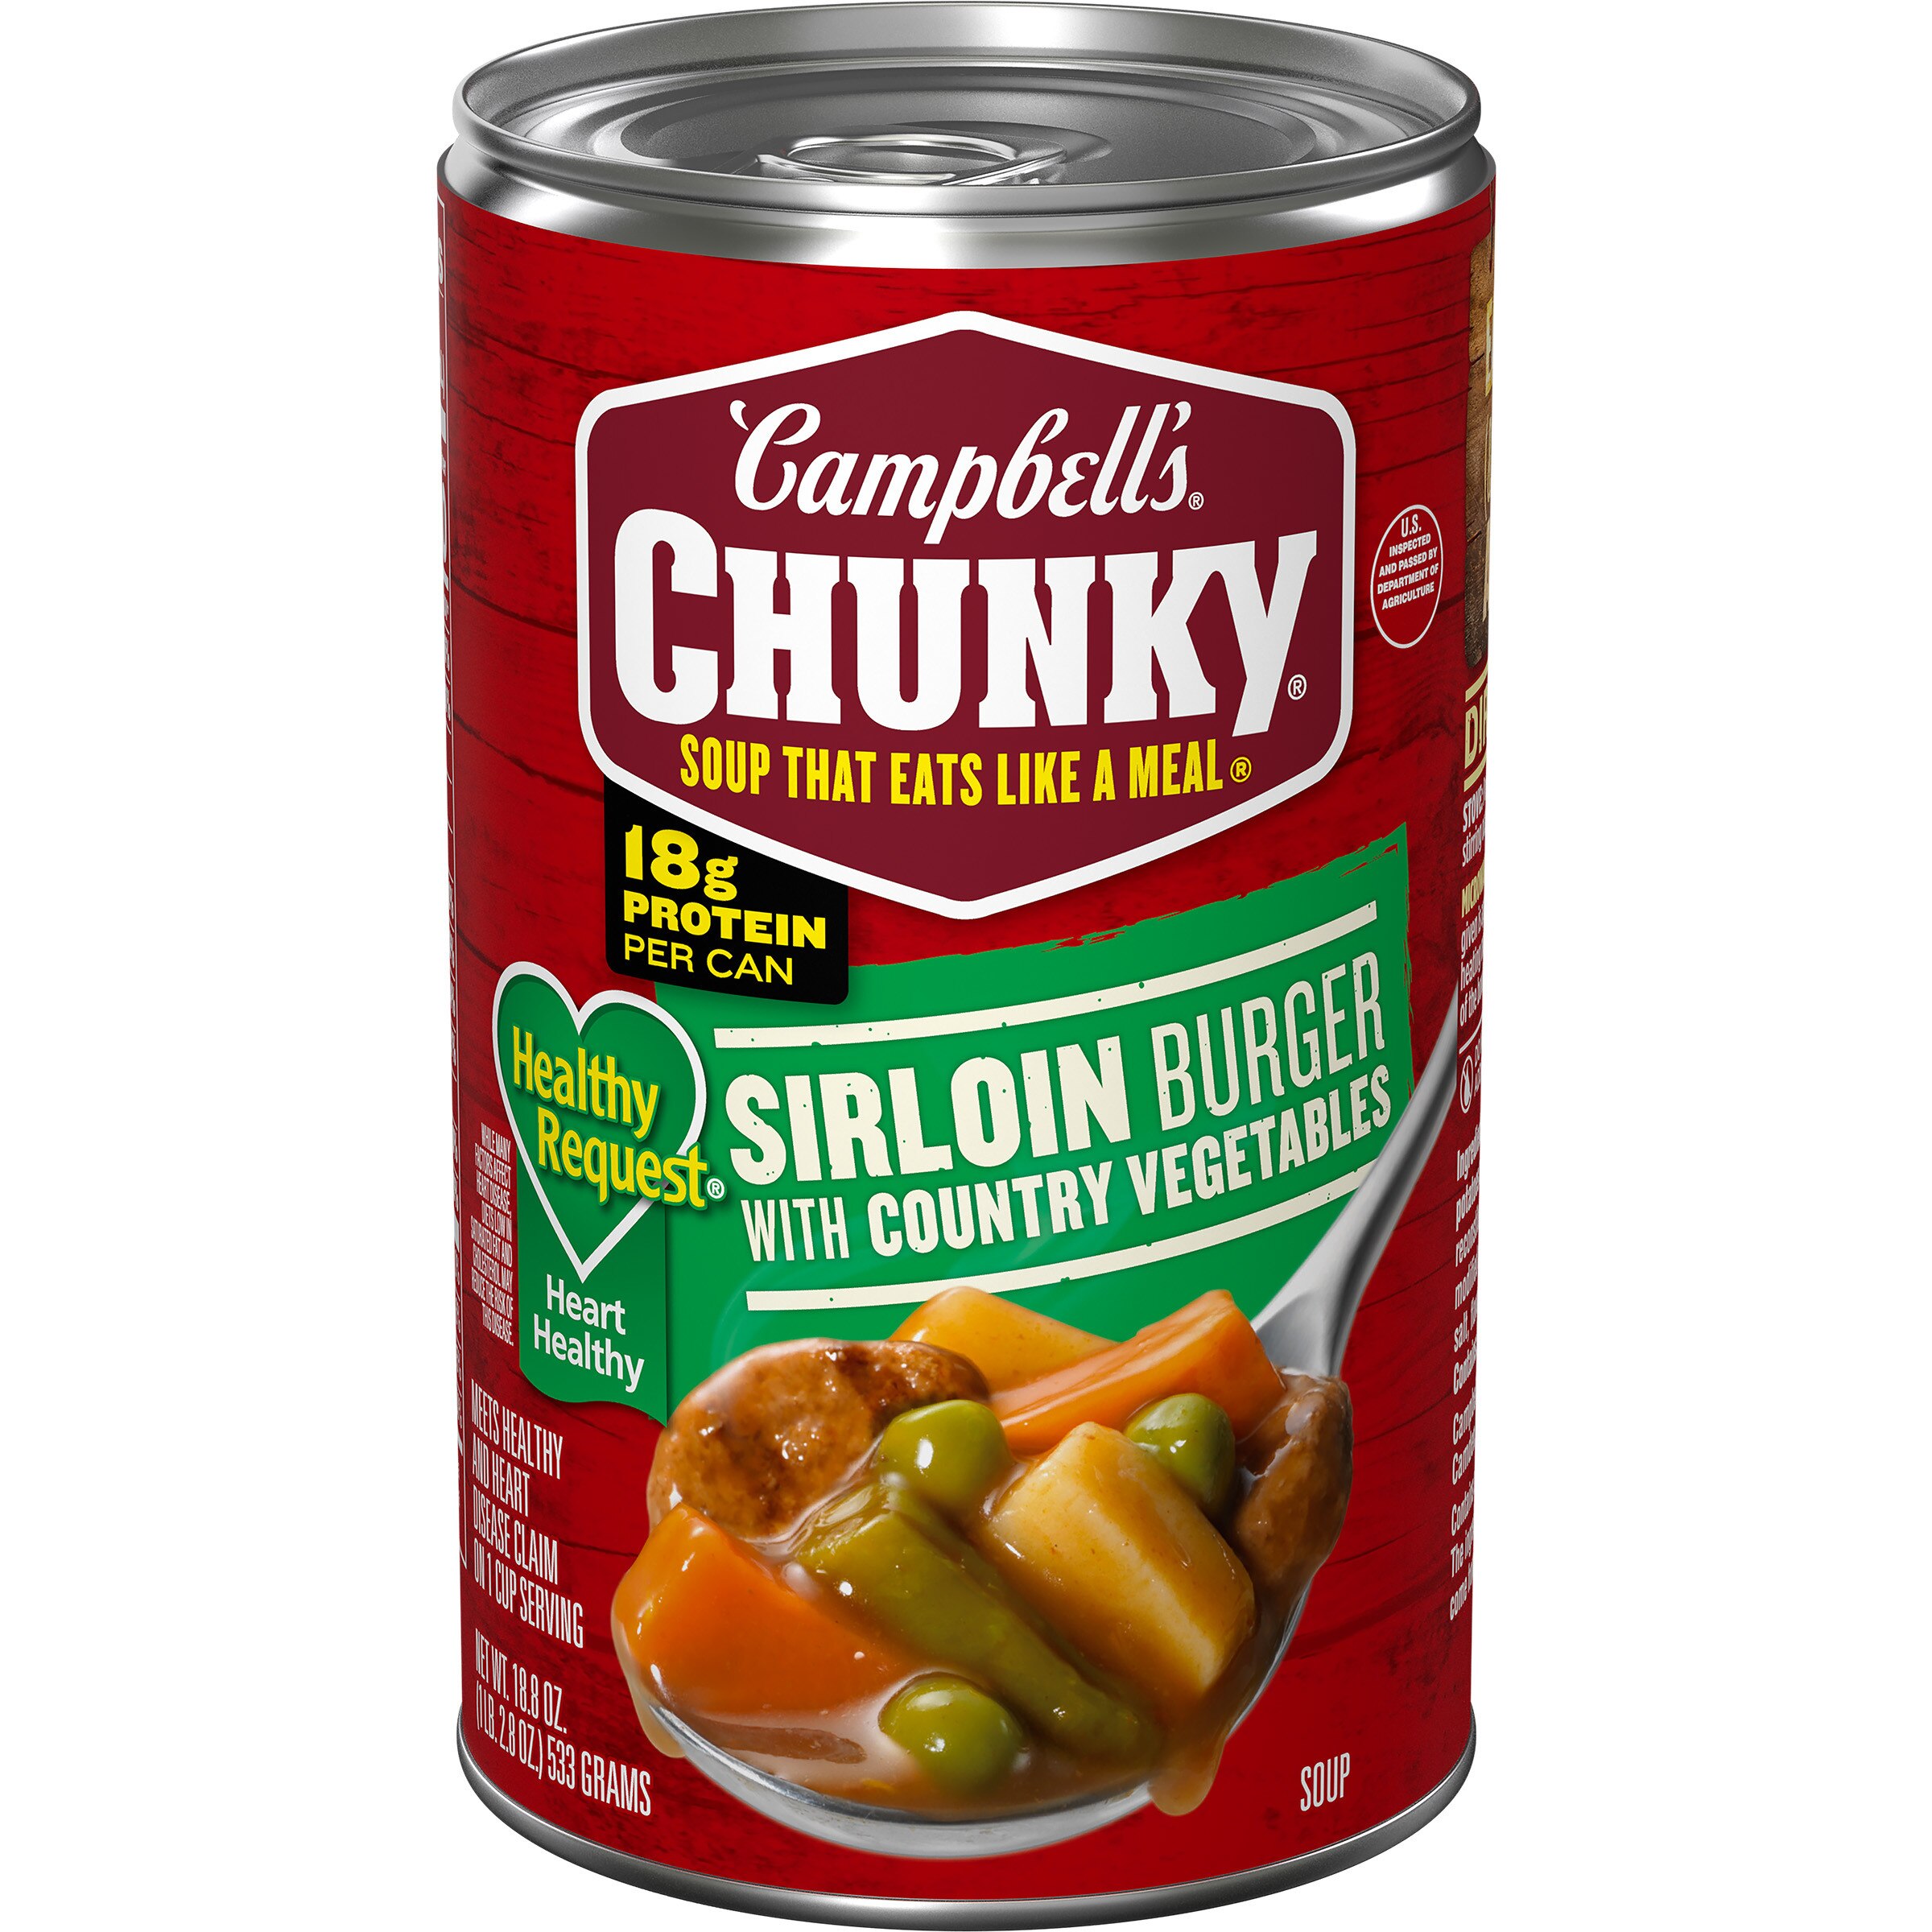 Campbell's Chunky Healthy Request Soup, Sirloin Burger With Country Vegetable Beef Soup, 18.8 Oz , CVS